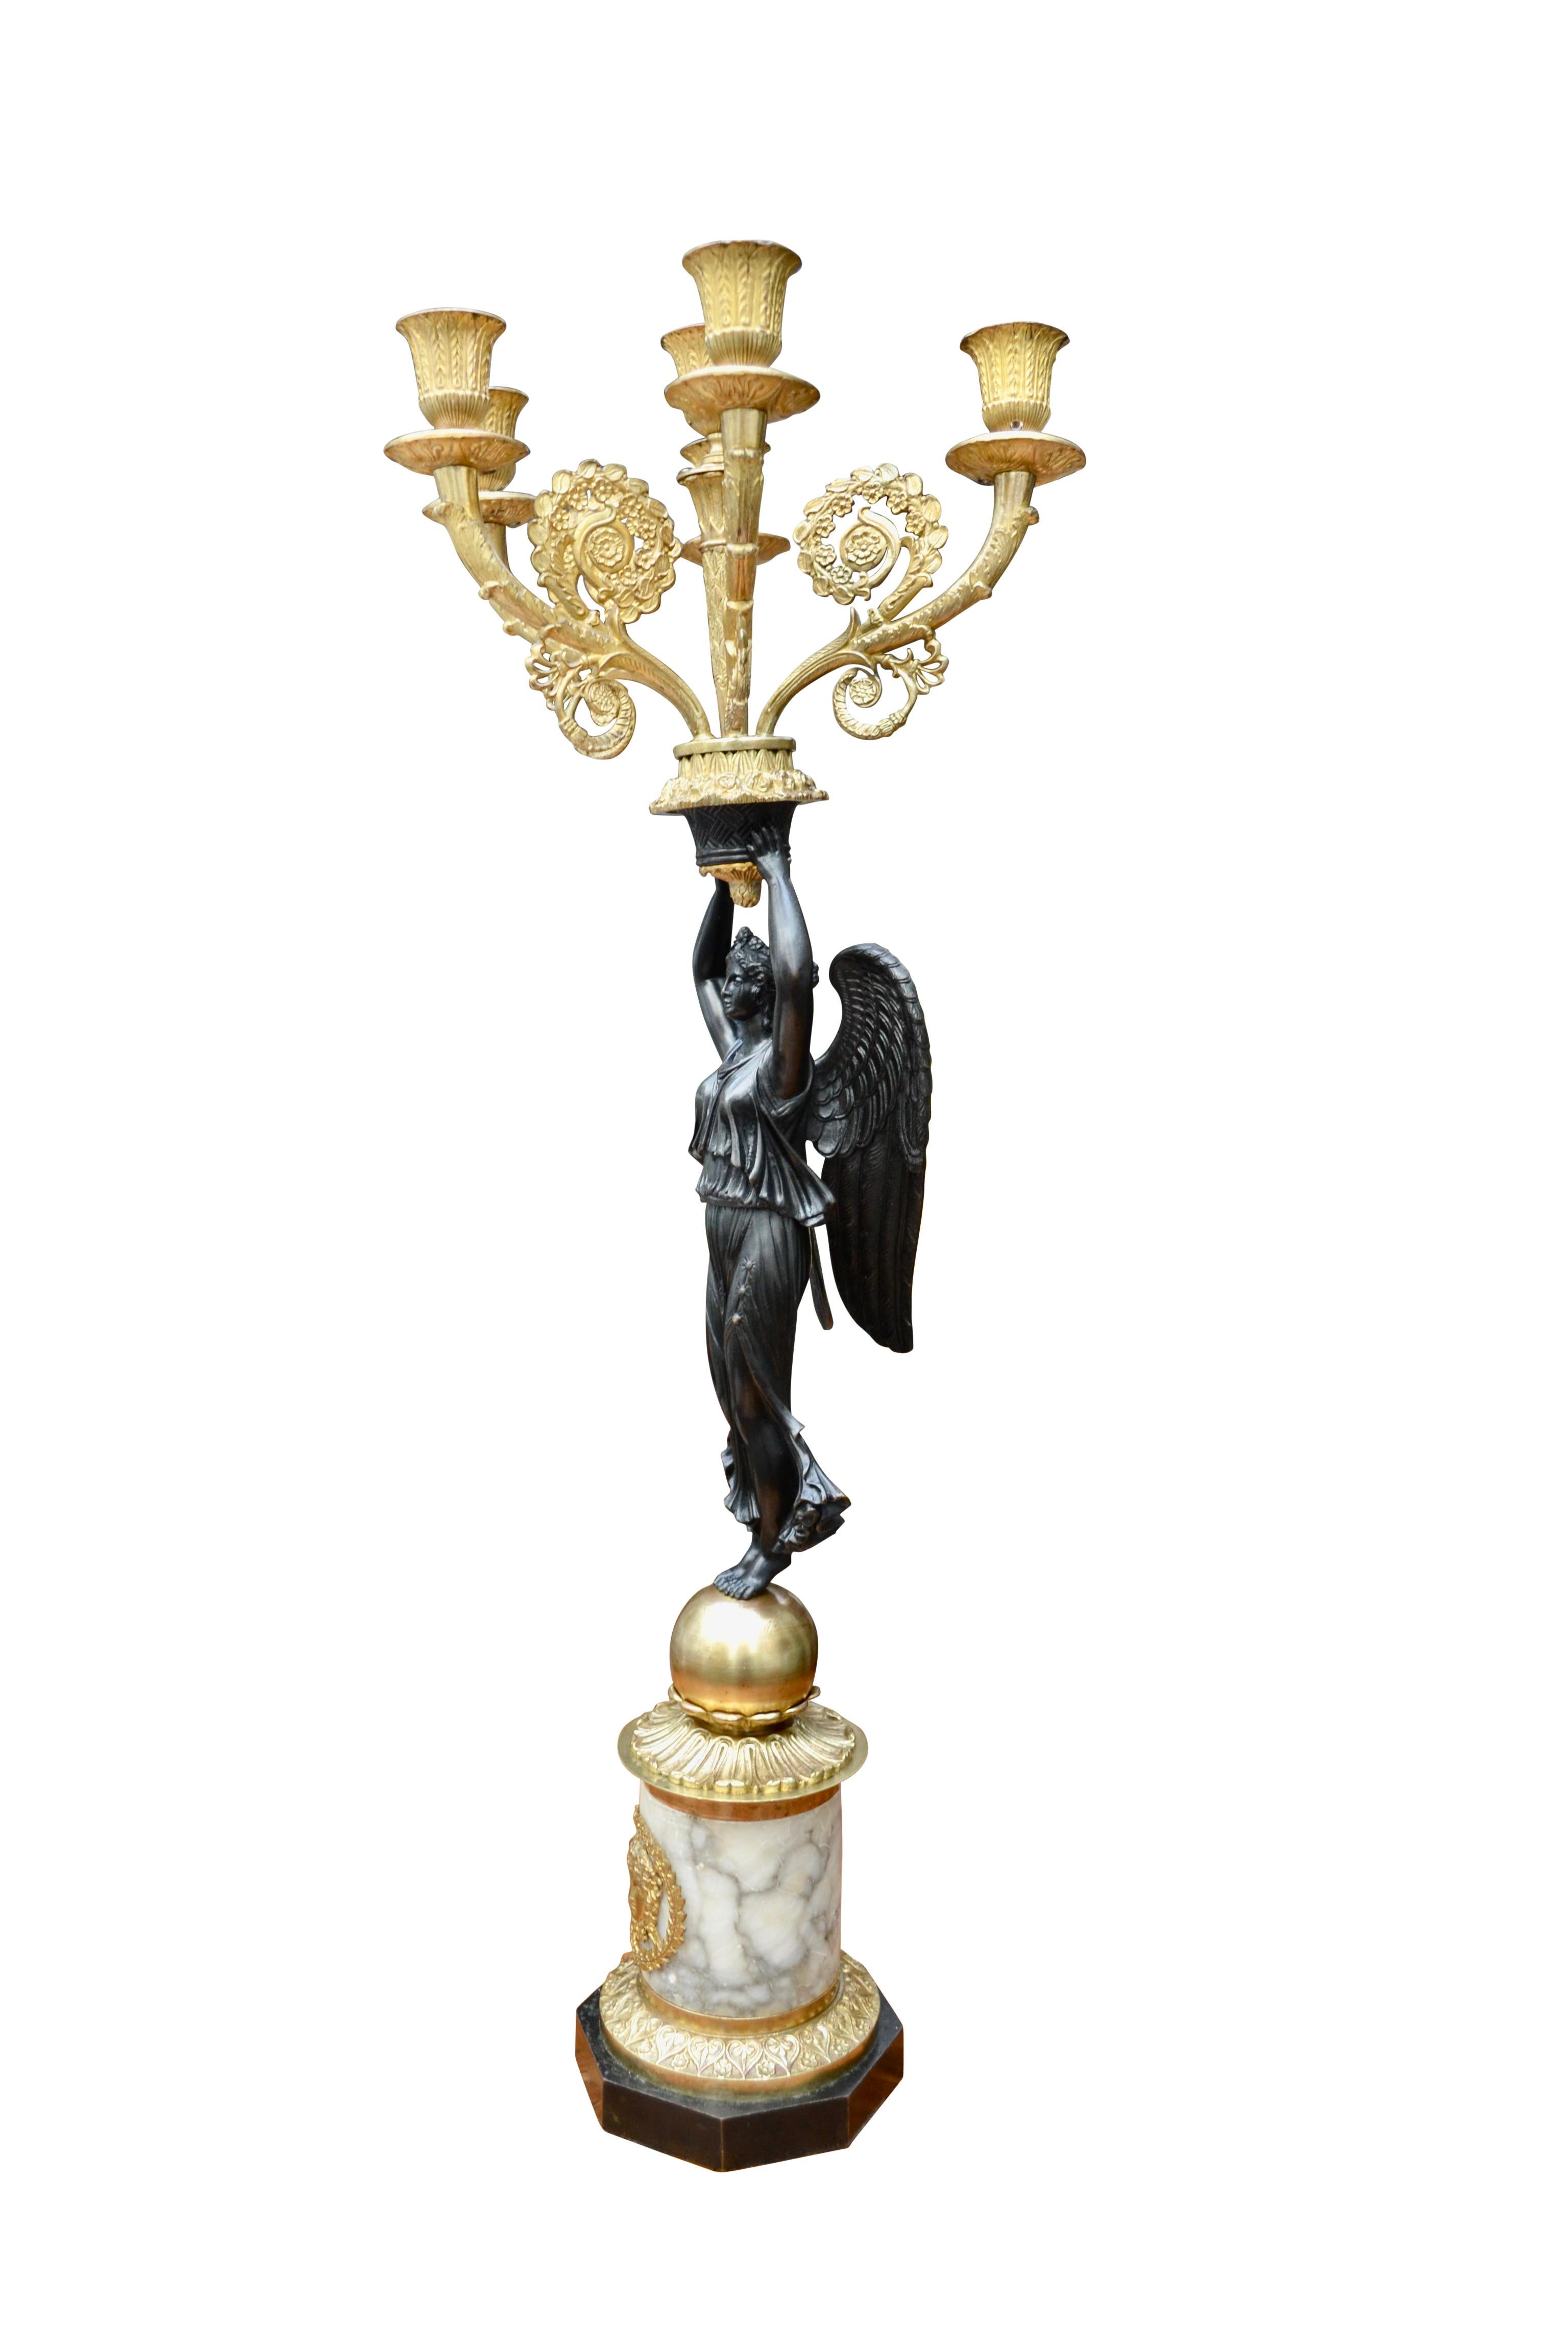 Single French Empire Style Patinated  and Gilt Bronze Winged Victory Candelabra For Sale 11